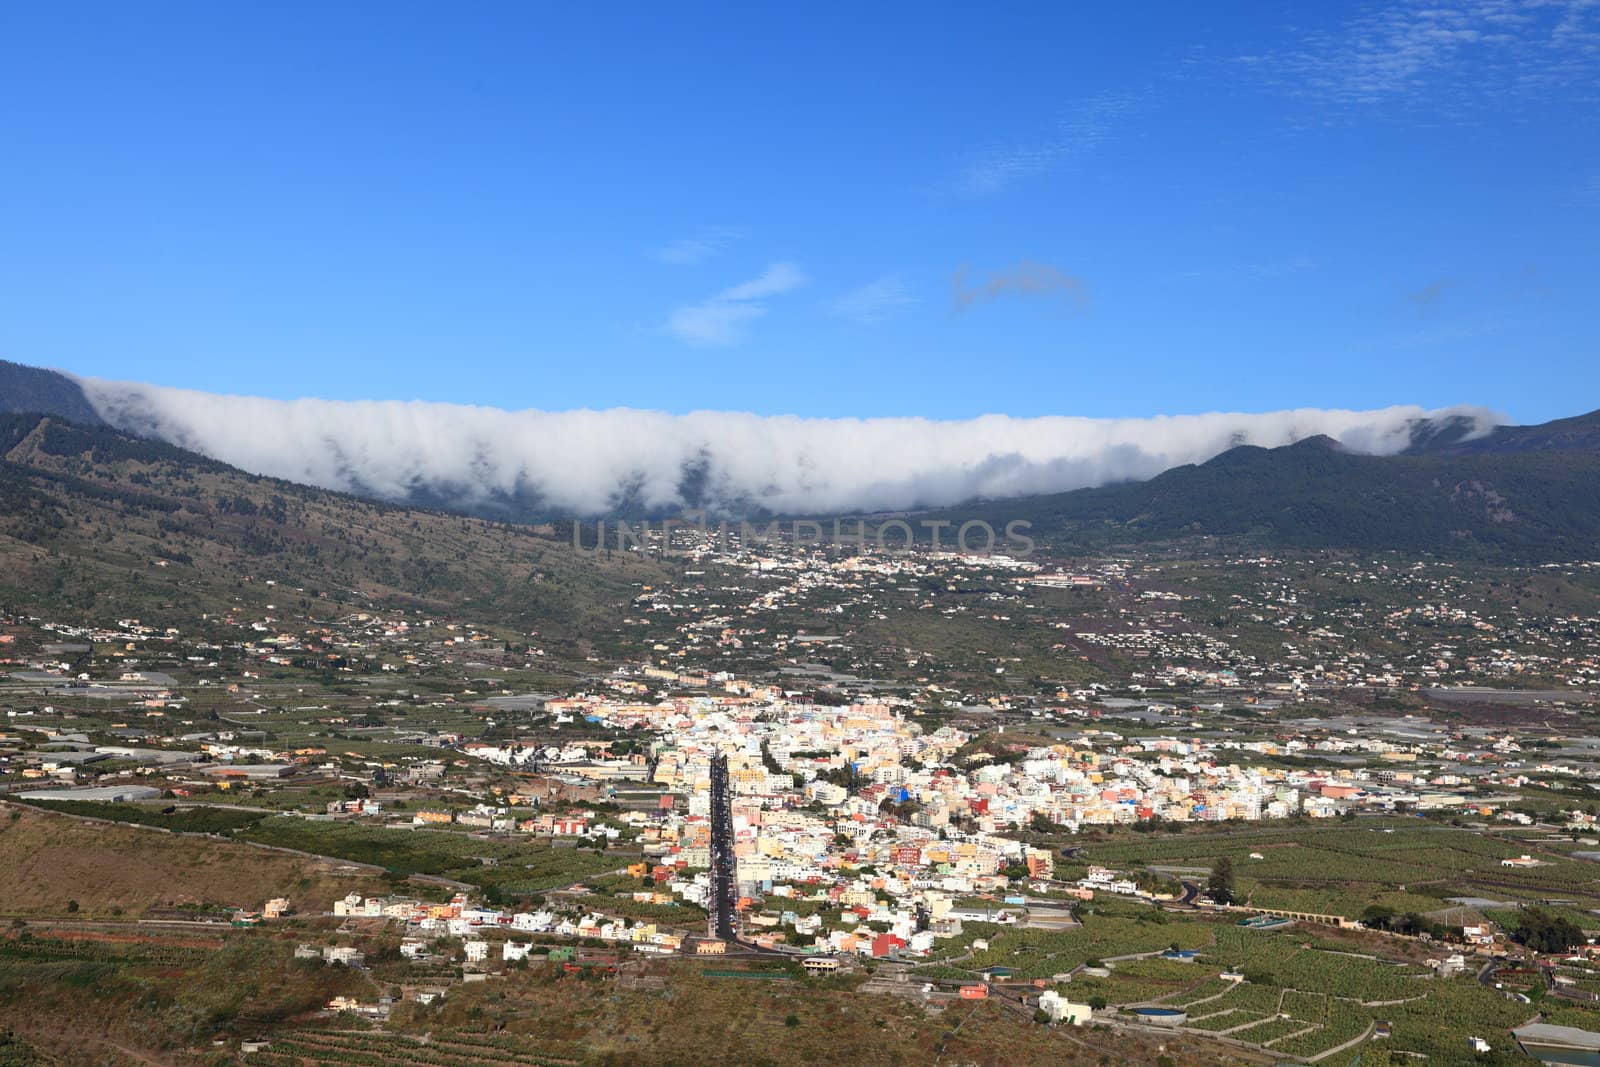 La Palma, Canary Islands. Photo shows the rare and famous cloud phenomena where clouds are falling down over the mountain ridge Cumbre Nueva like a waterfall. Also showing city Los Llanos de Aridane